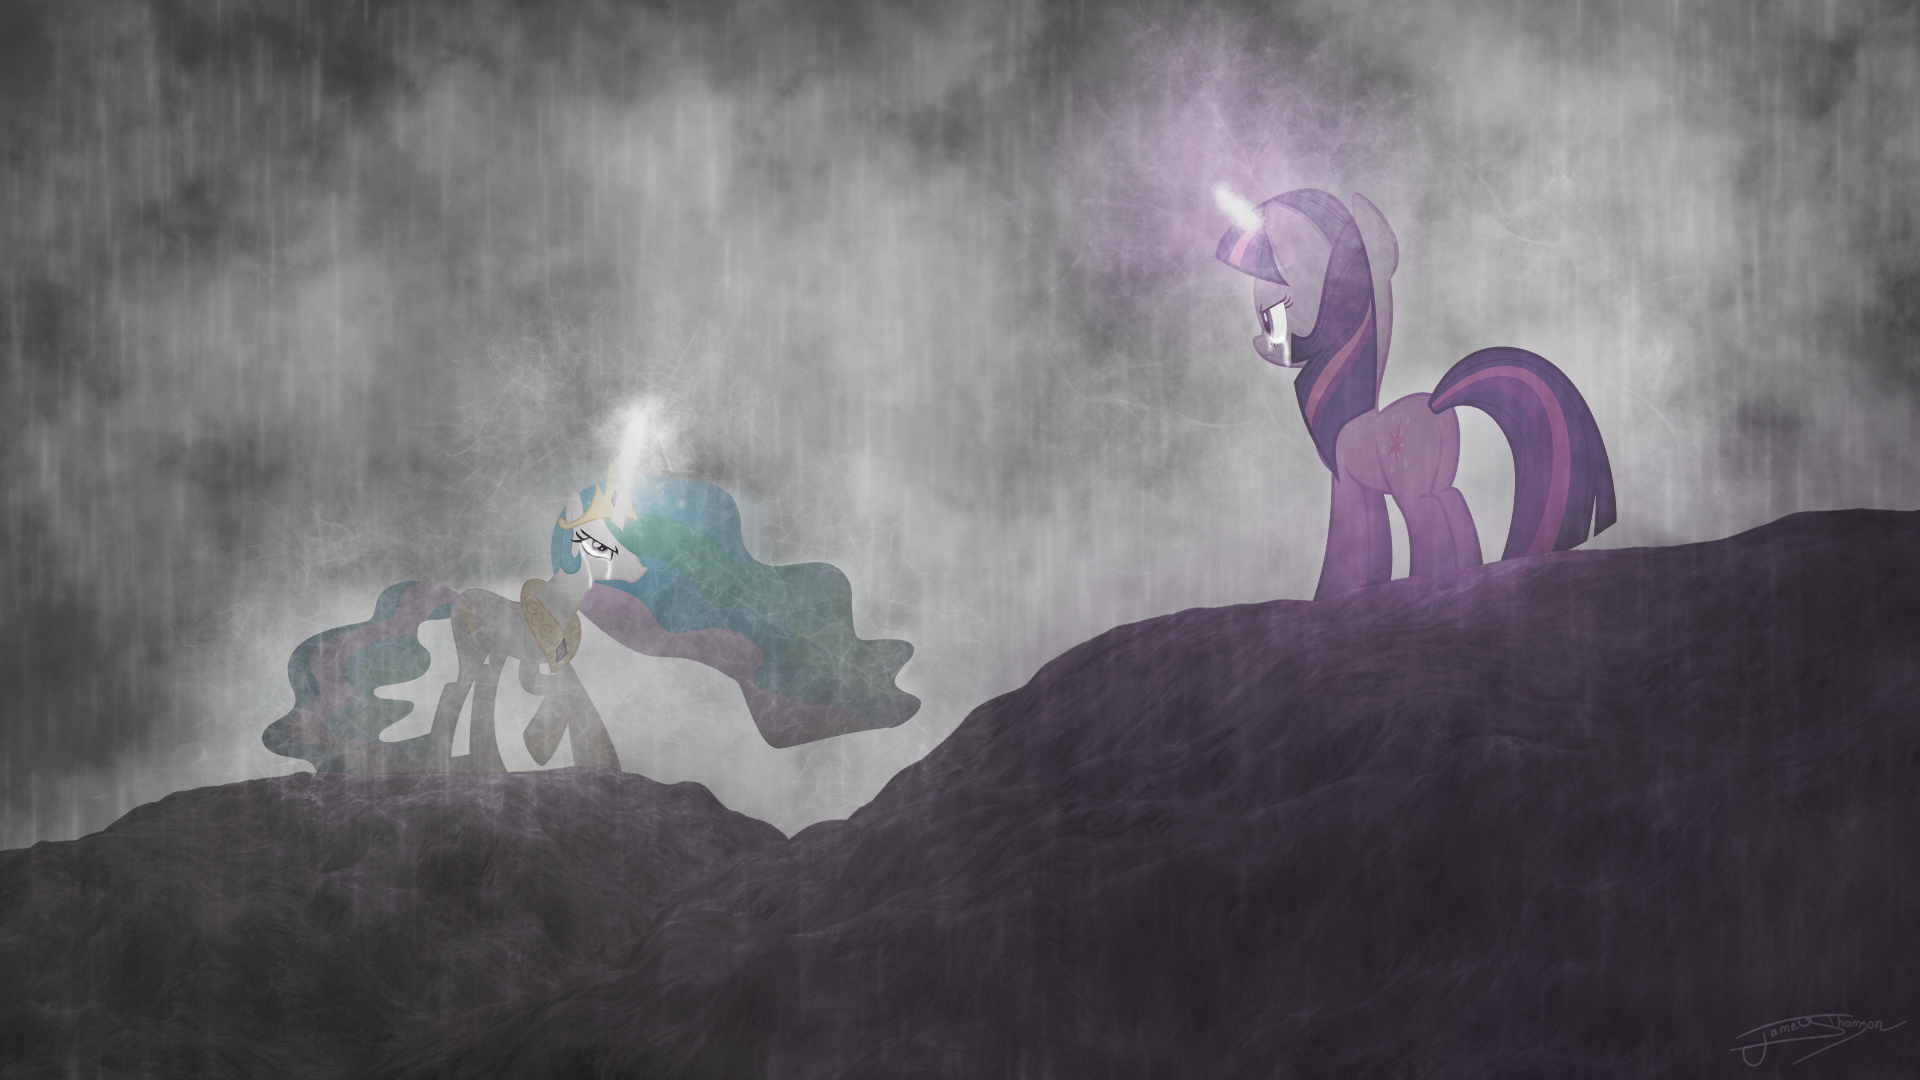 The Fallen Apprentice by Jamey4, SpinnyHat and tdreyer1